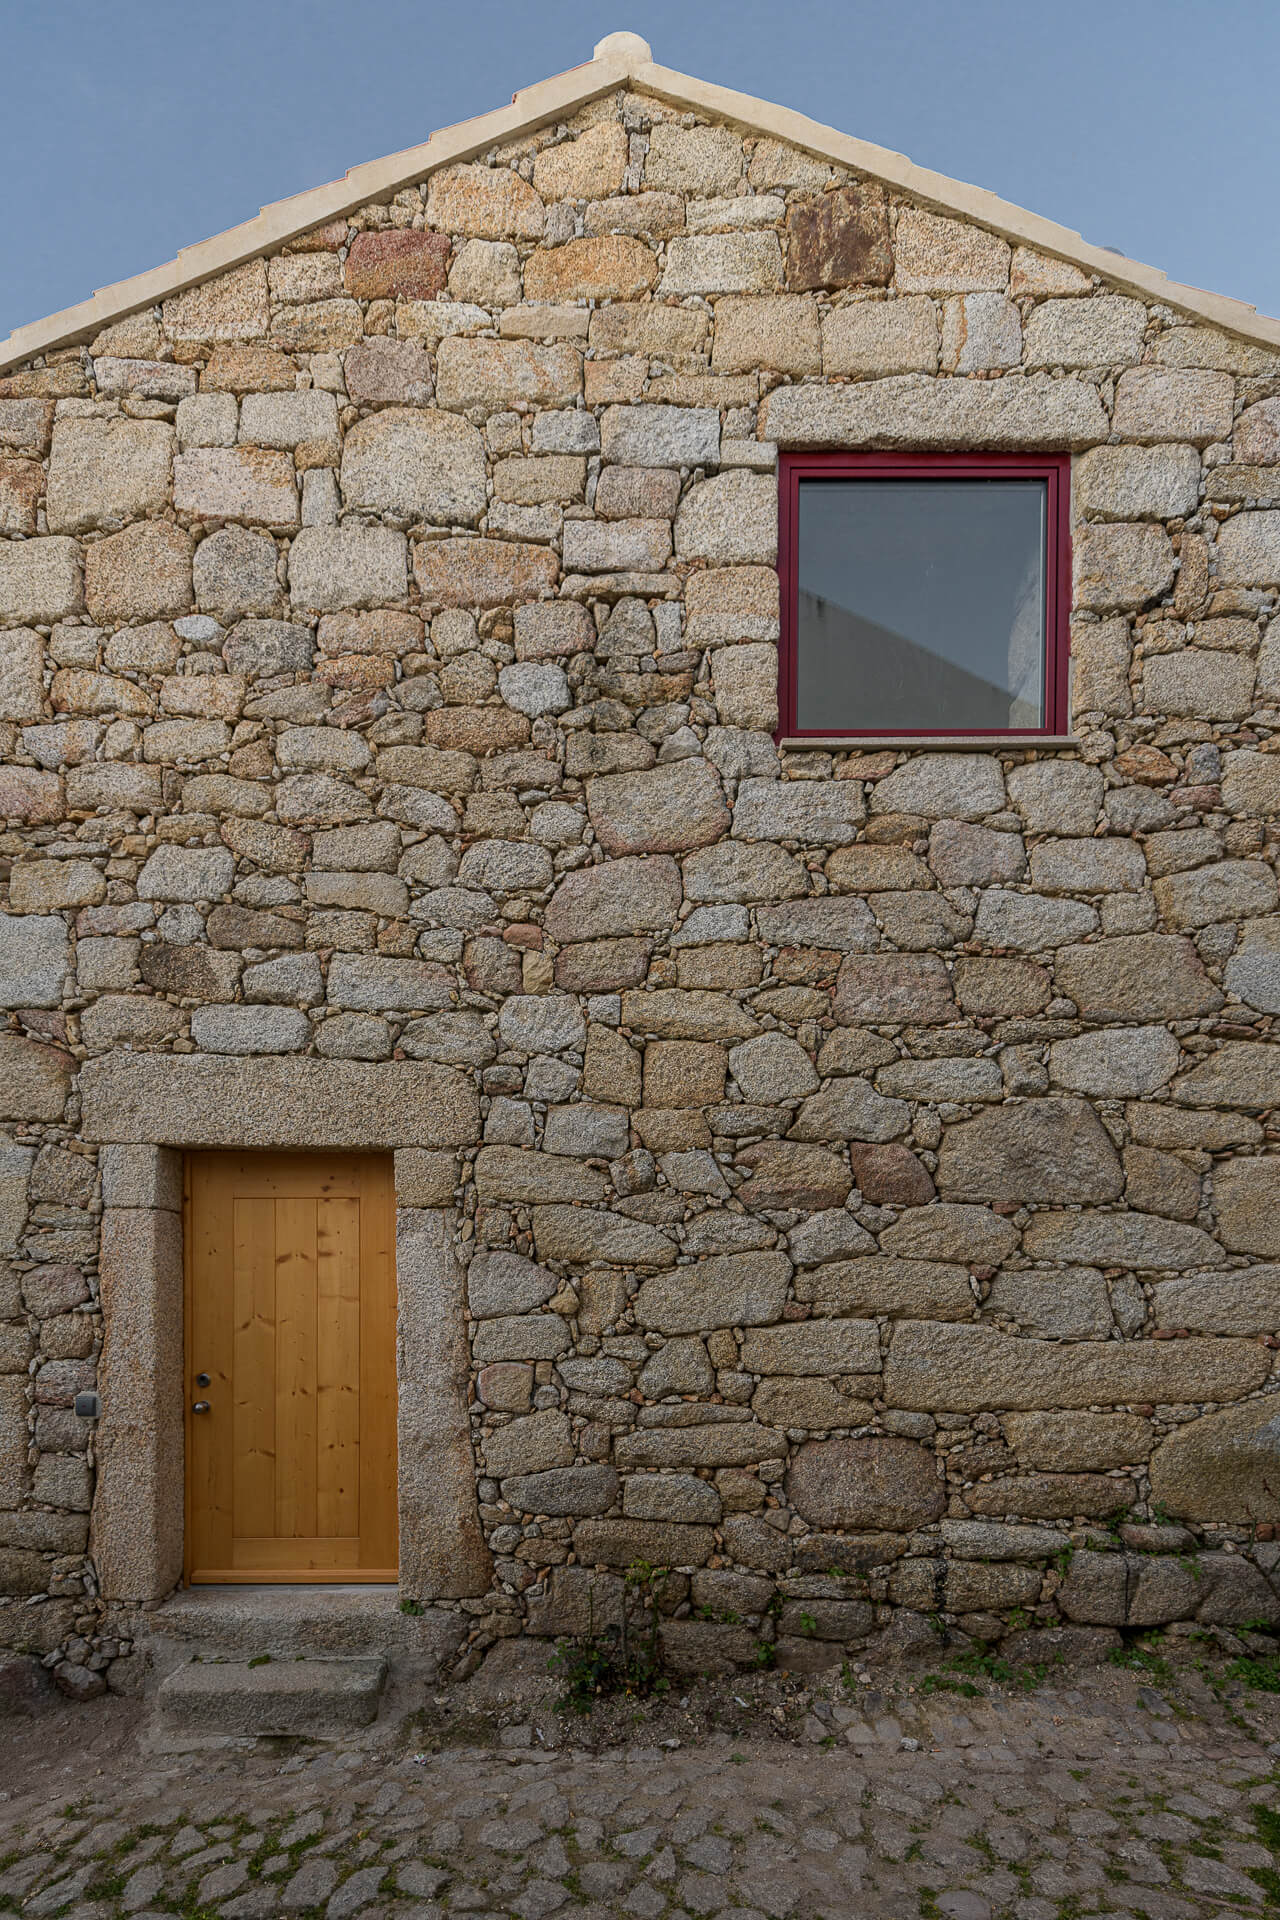 The exposed granite wall becomes the strong character of the exterior of this house